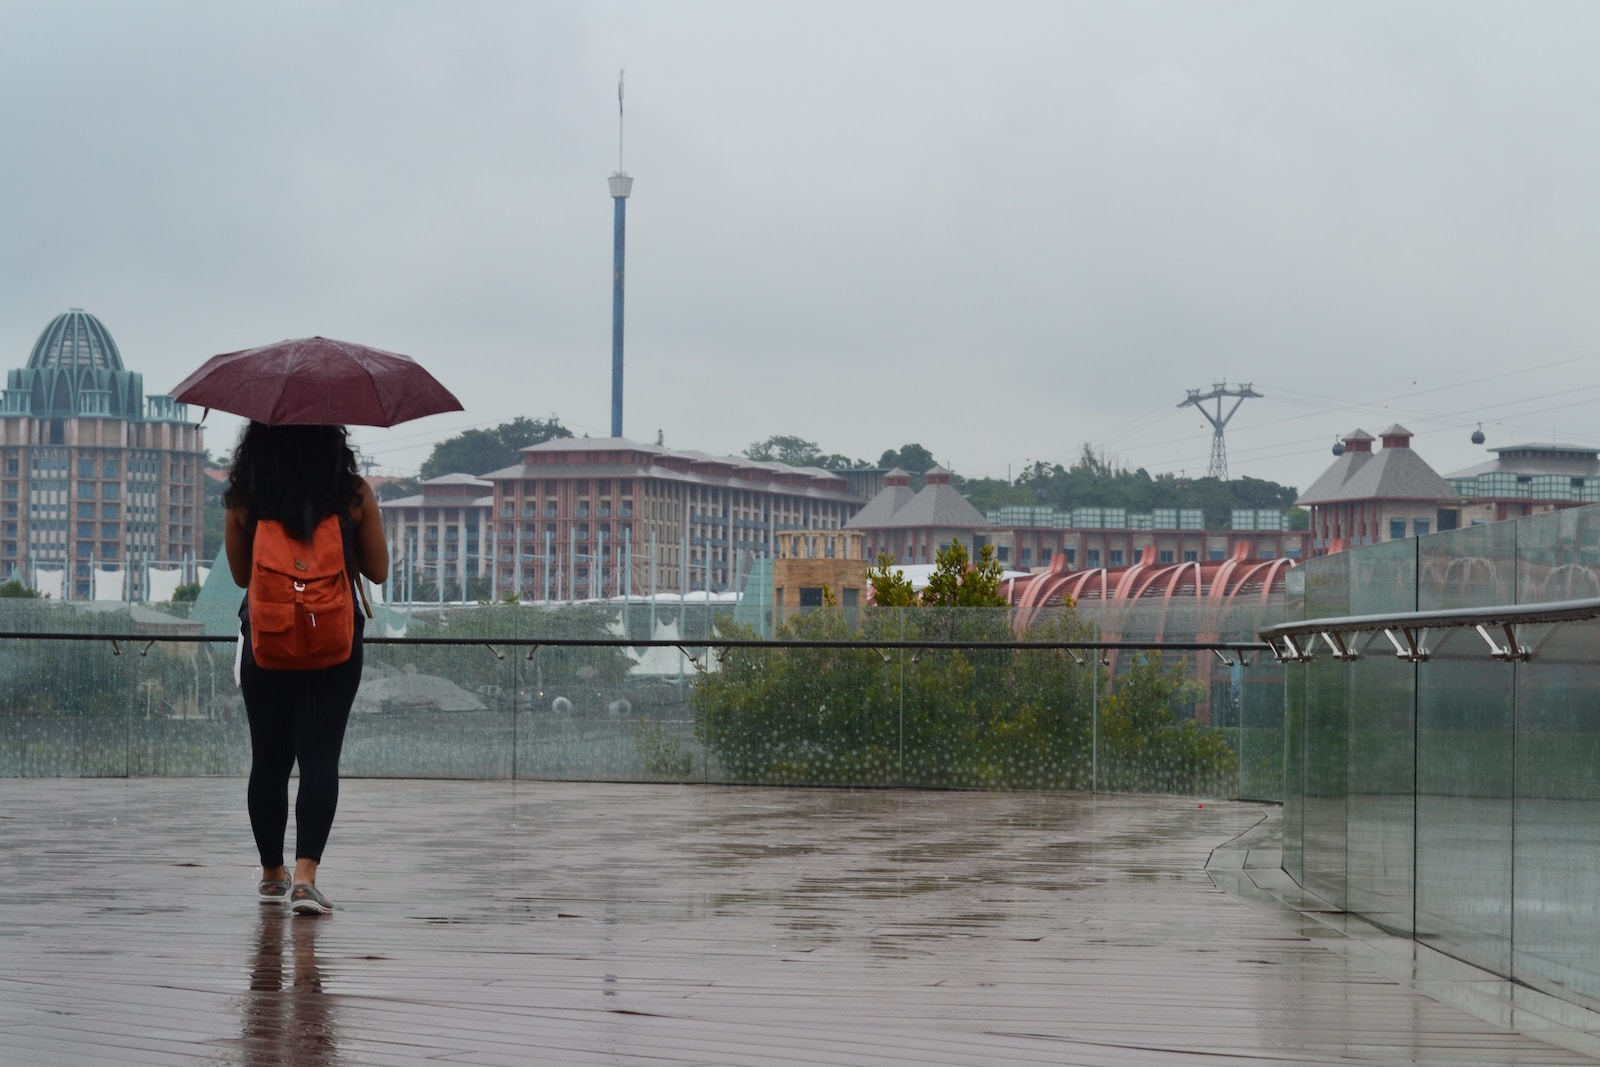 a woman with an orange backpack is walking in the rain with an umbrella